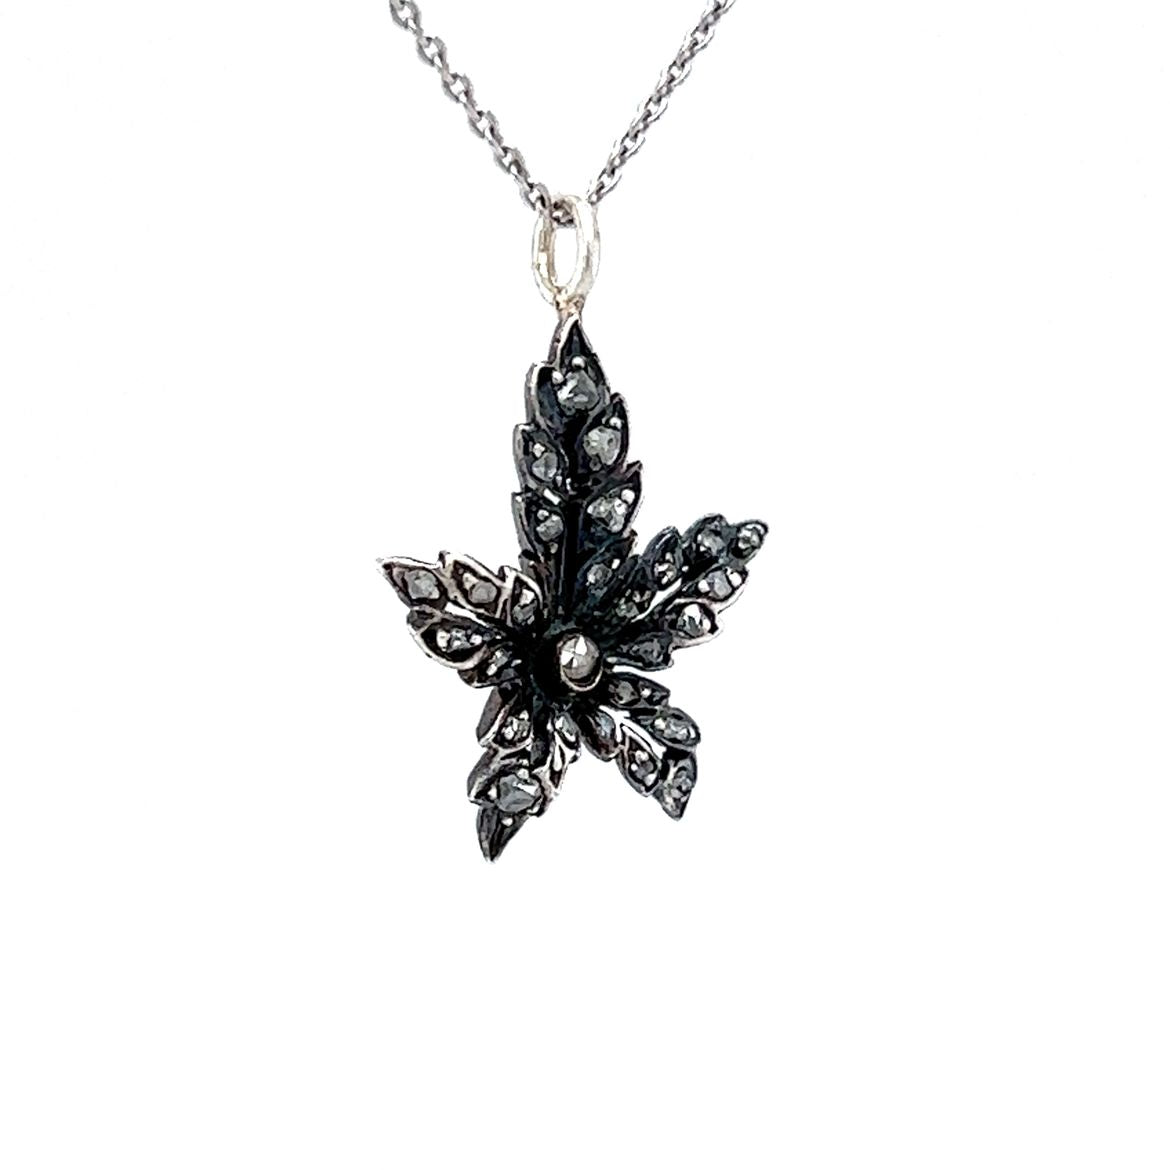 Georgian Diamond Leaf Pendant Necklace in Silver & 14kComposition: 14 Karat White Gold/Sterling Silver Total Diamond Weight: .17ct Total Gram Weight: 2.8 g Inscription: 14KT (chain)
      